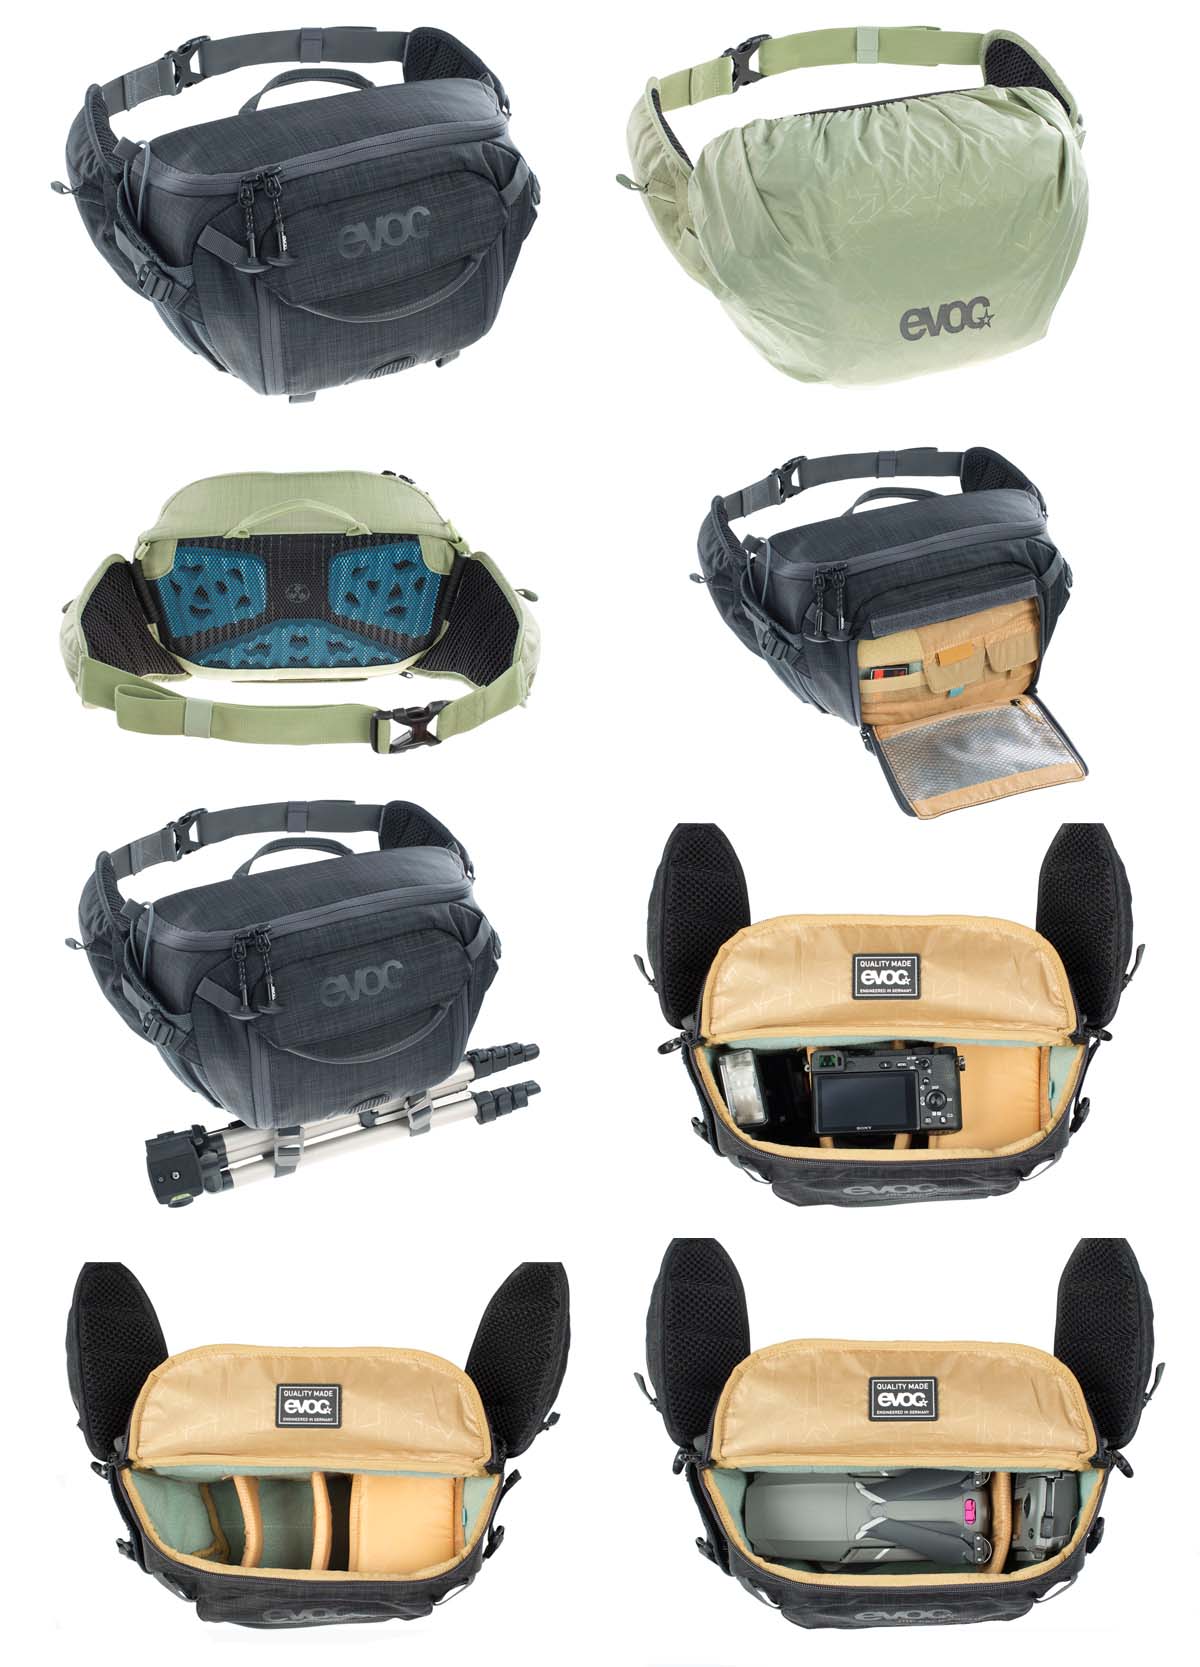 EVOC updates Photography line with options for anyone who rides or flies with a camera